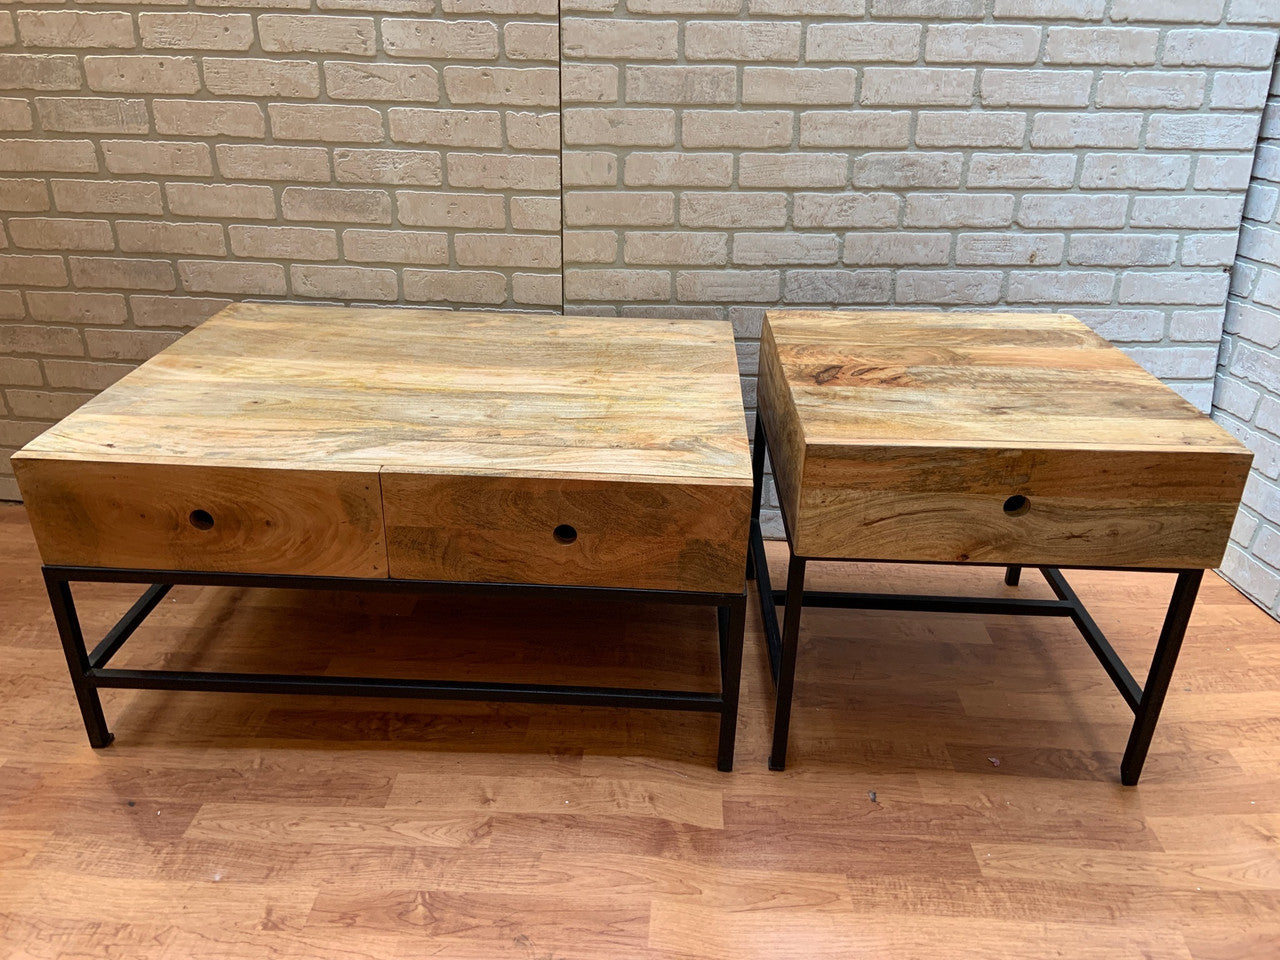 Industrial Rustic Hand Carved Teak Wood and Steel Side and Coffee Table - Set of 2